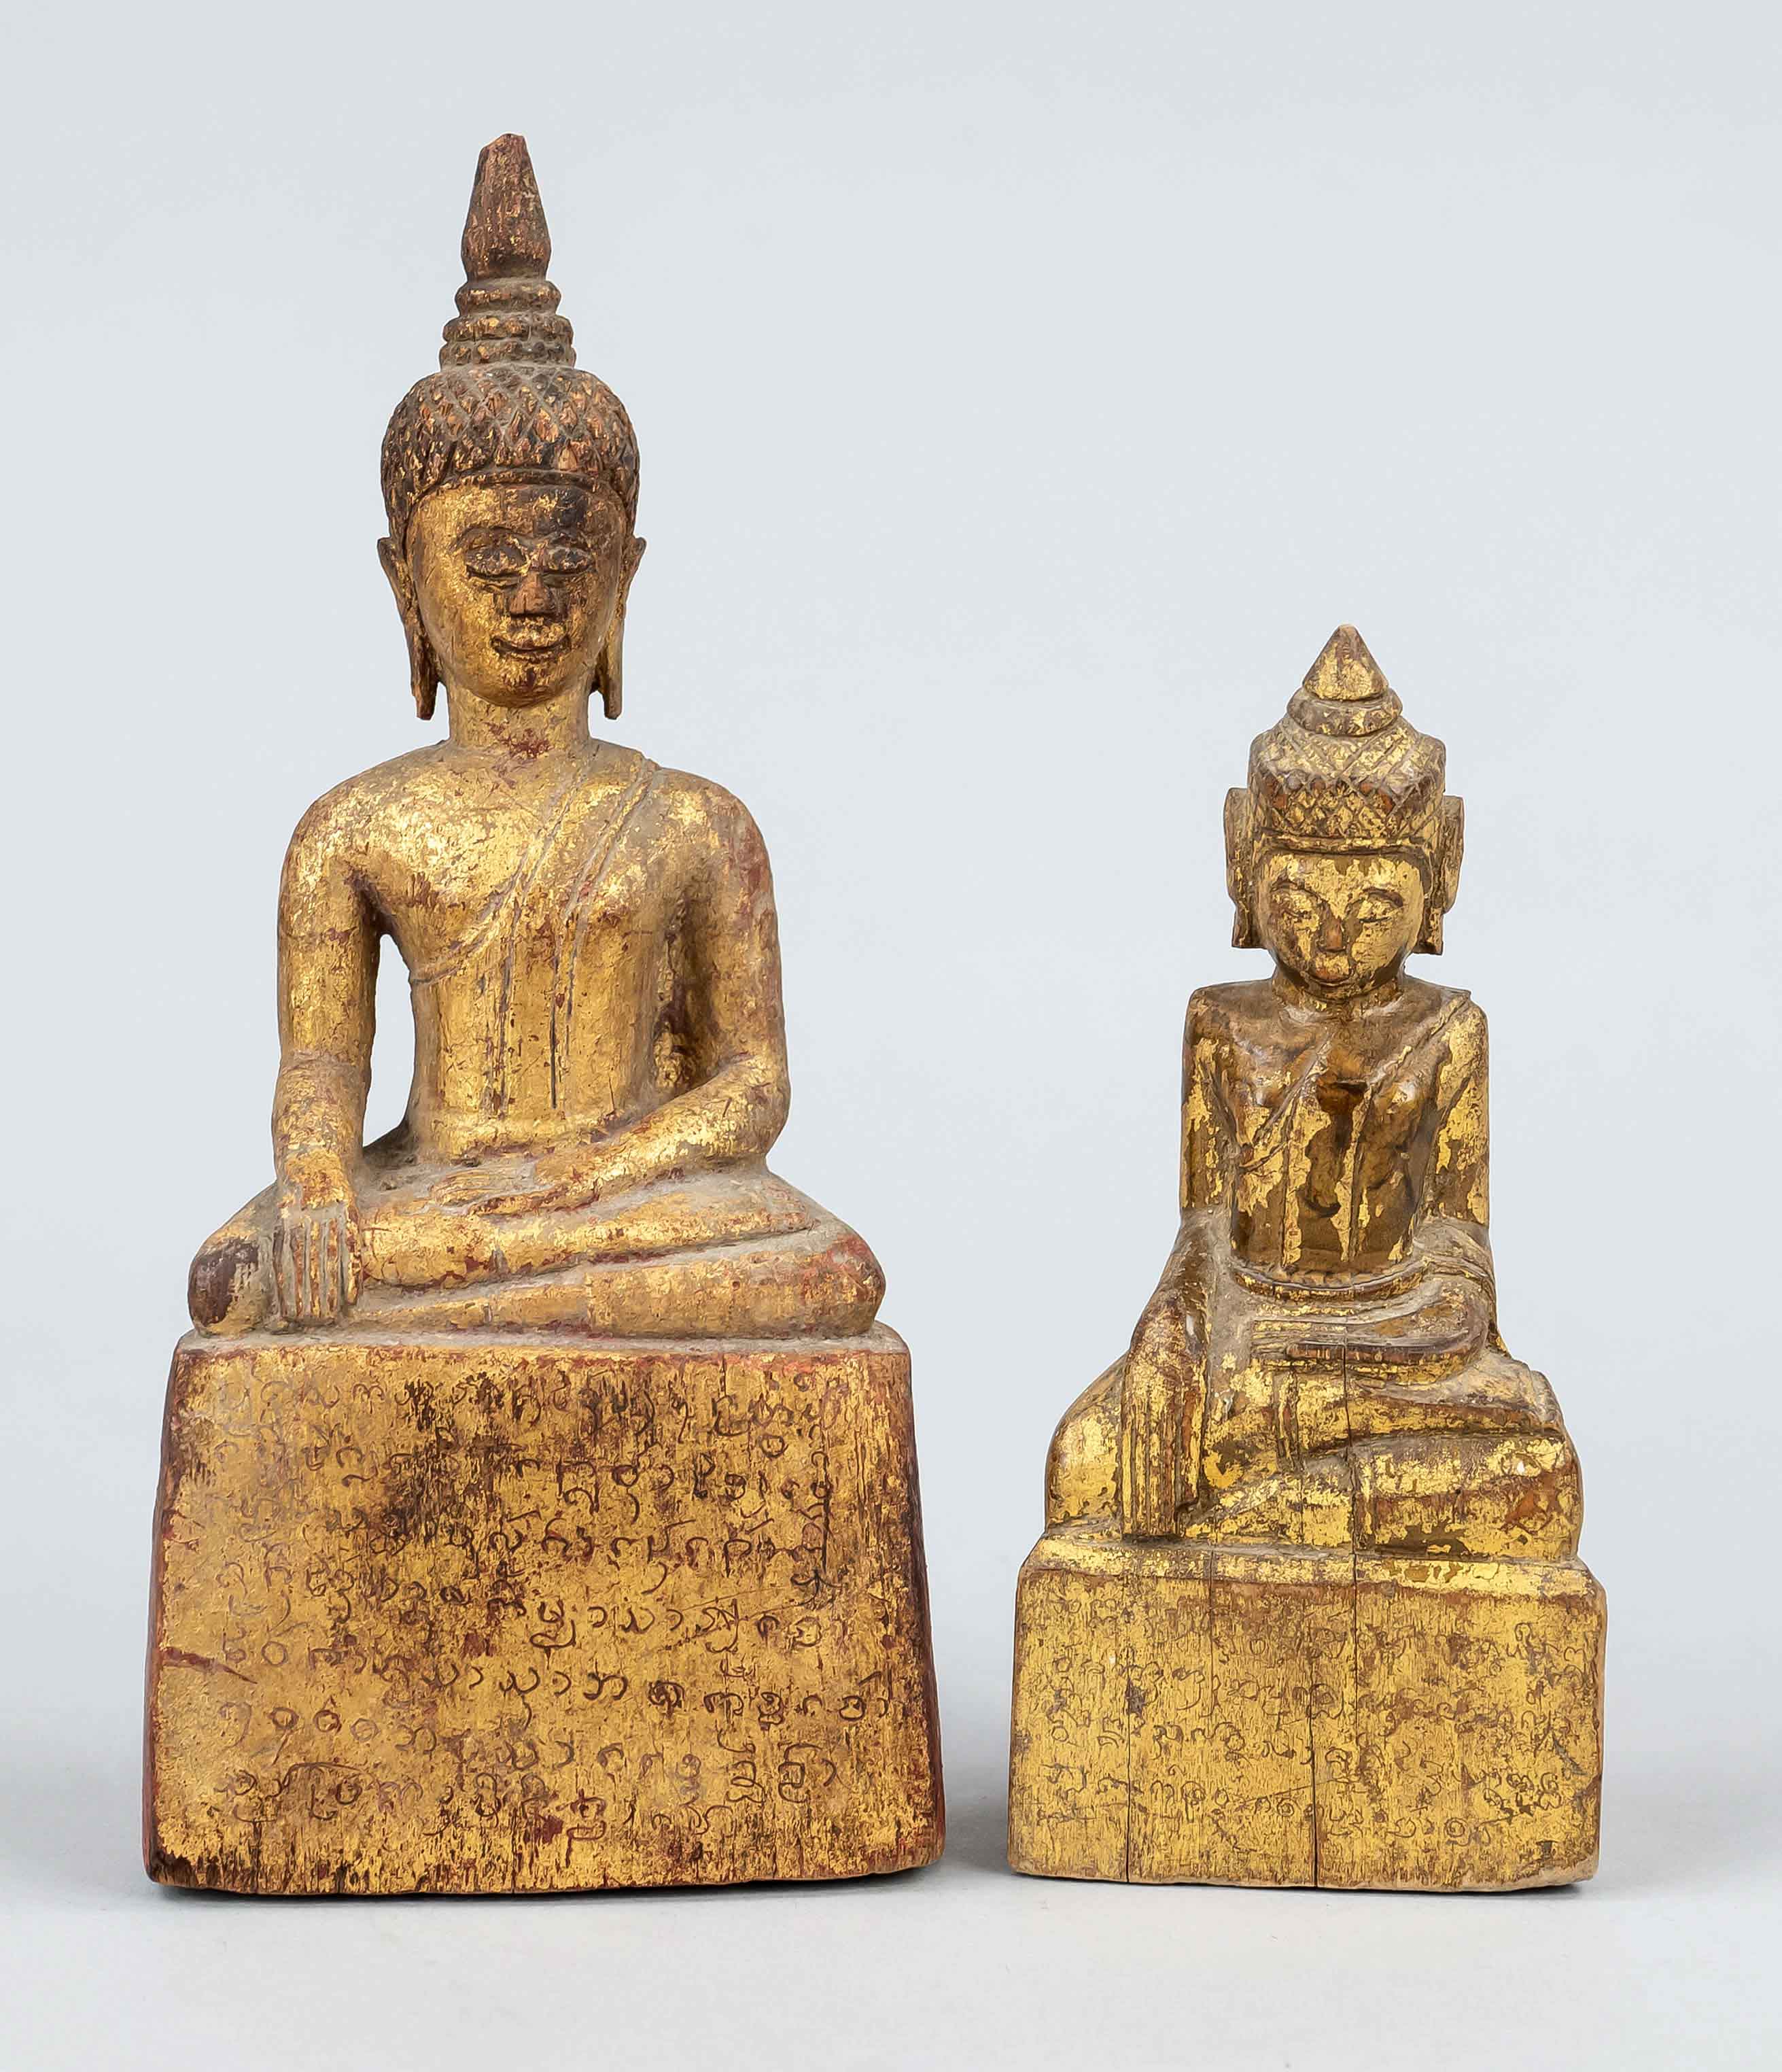 2 Buddhas, Thailand or Myanmar, 20th c., wood with red and gold lacquer, writing, h to 18,5cm